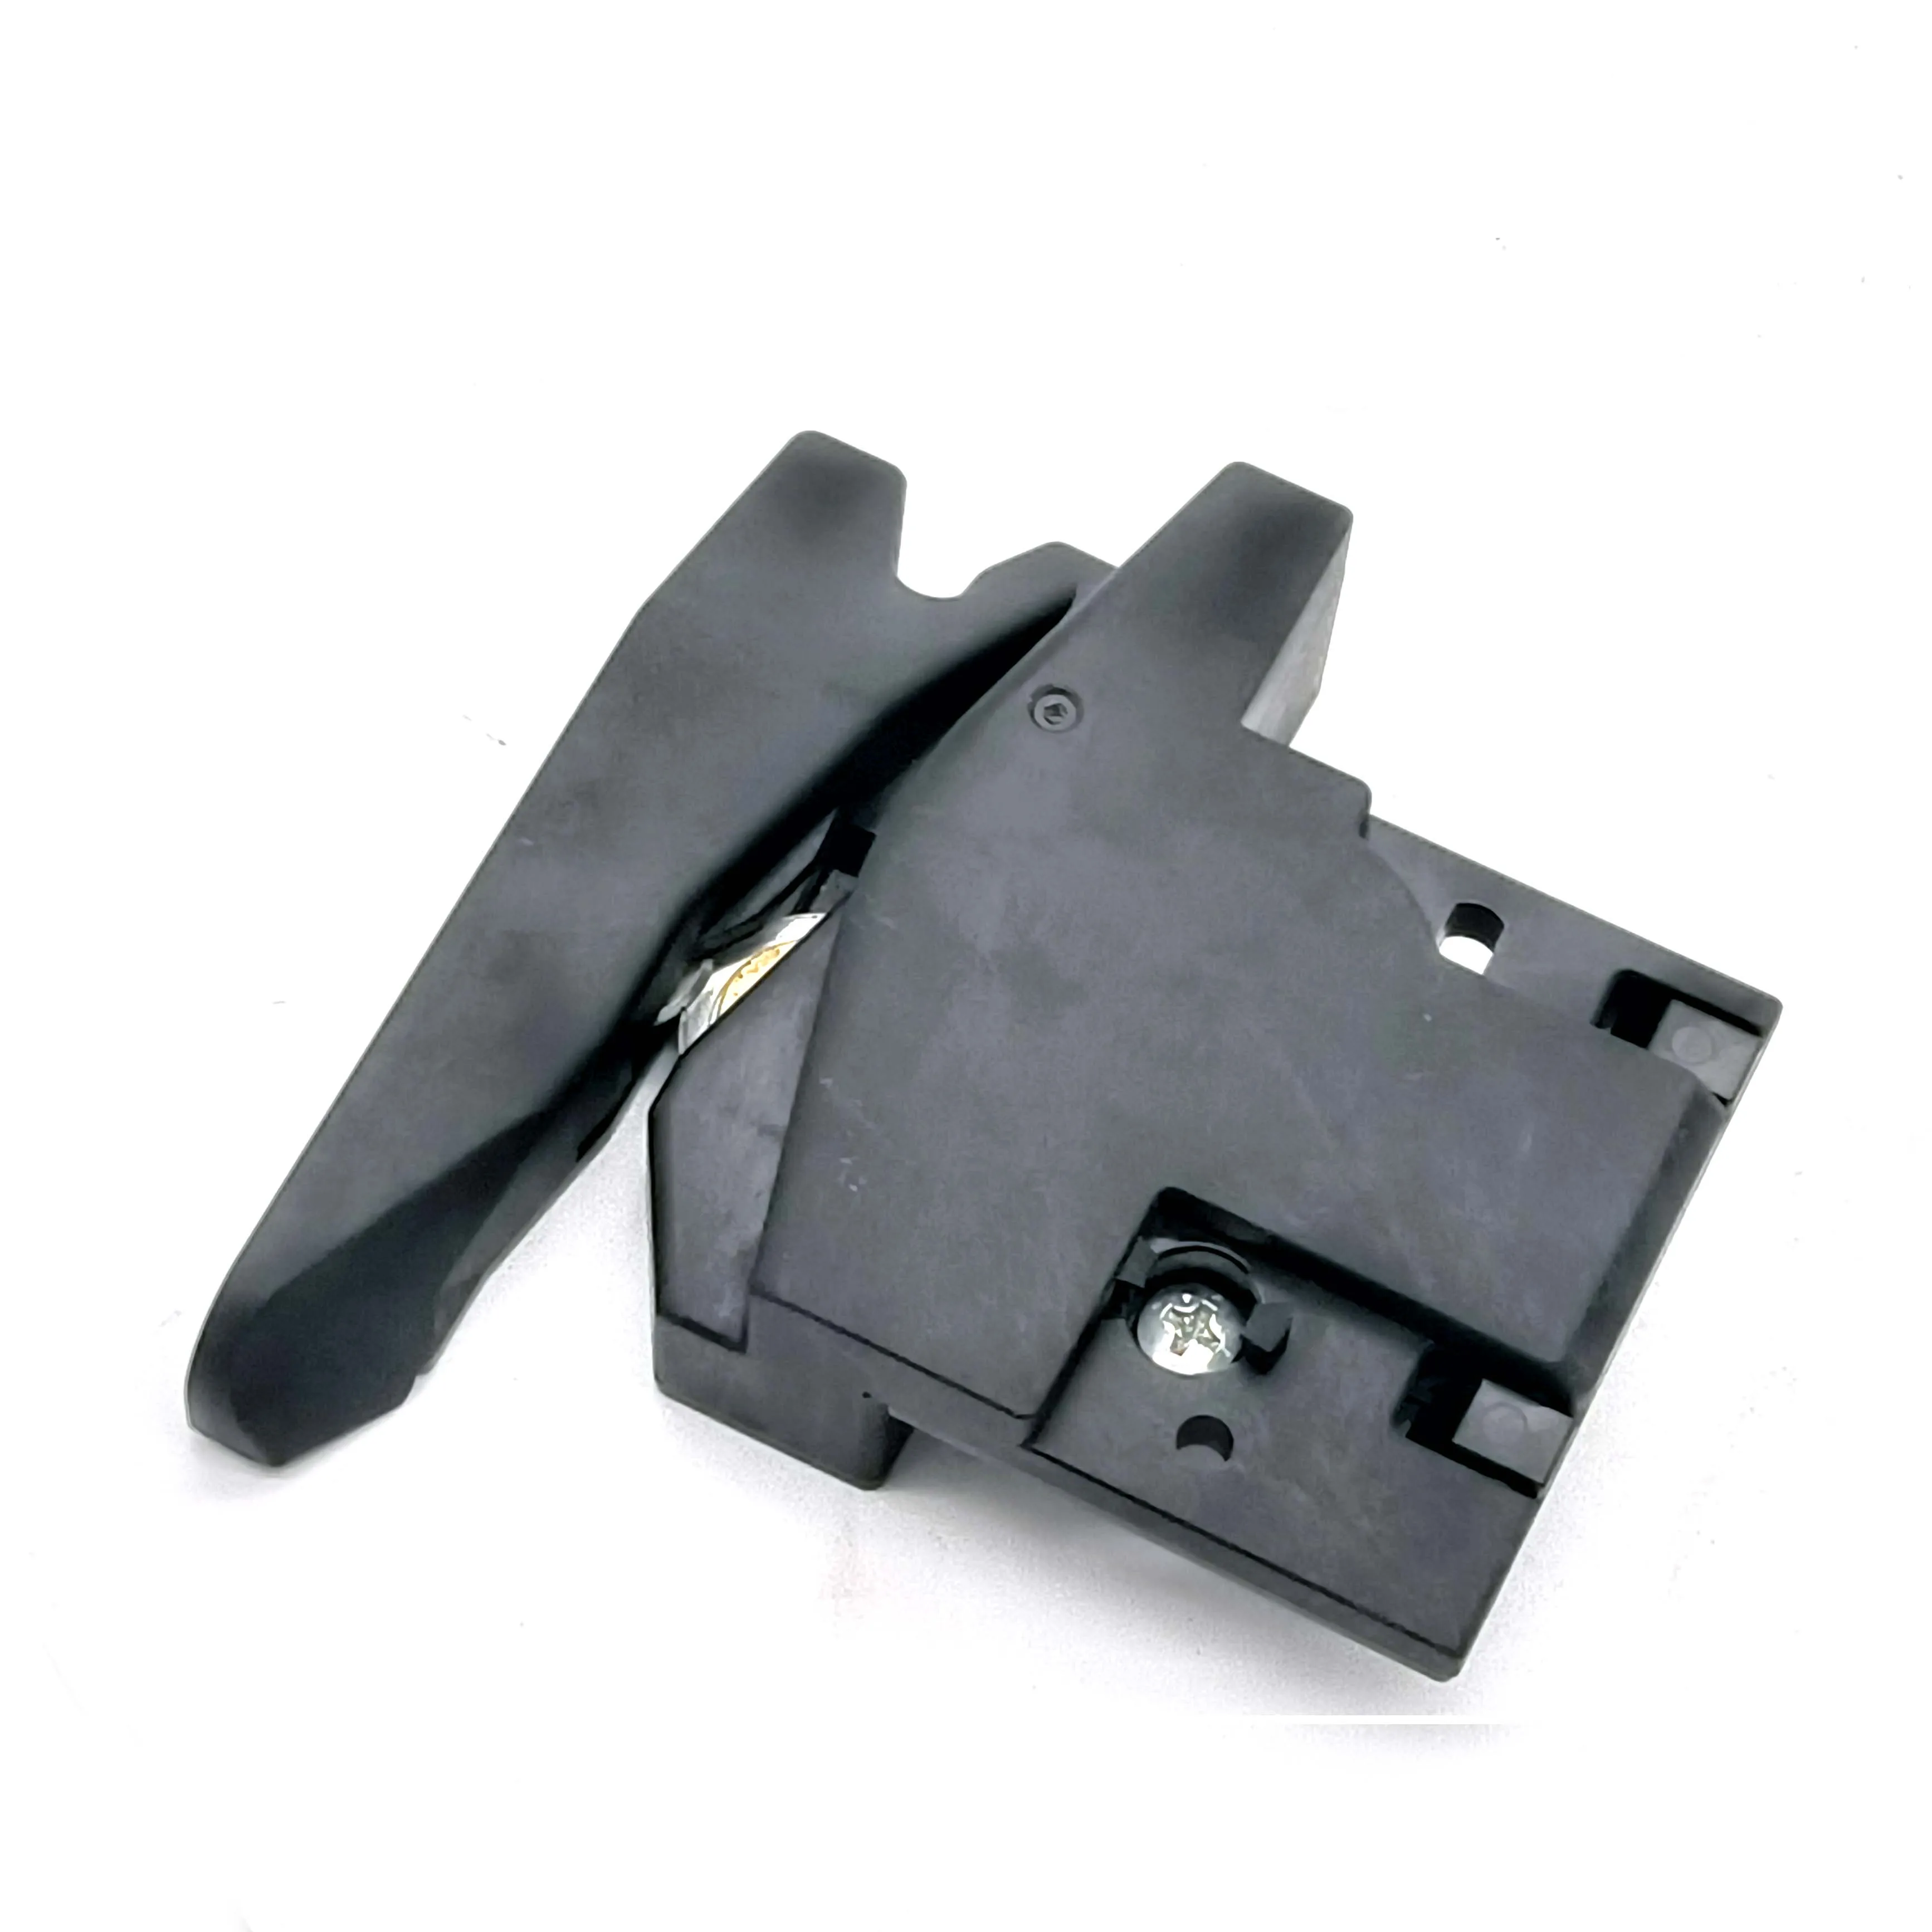 

Cutter Pro 4910 Fits For Epson 4910 4900 4908